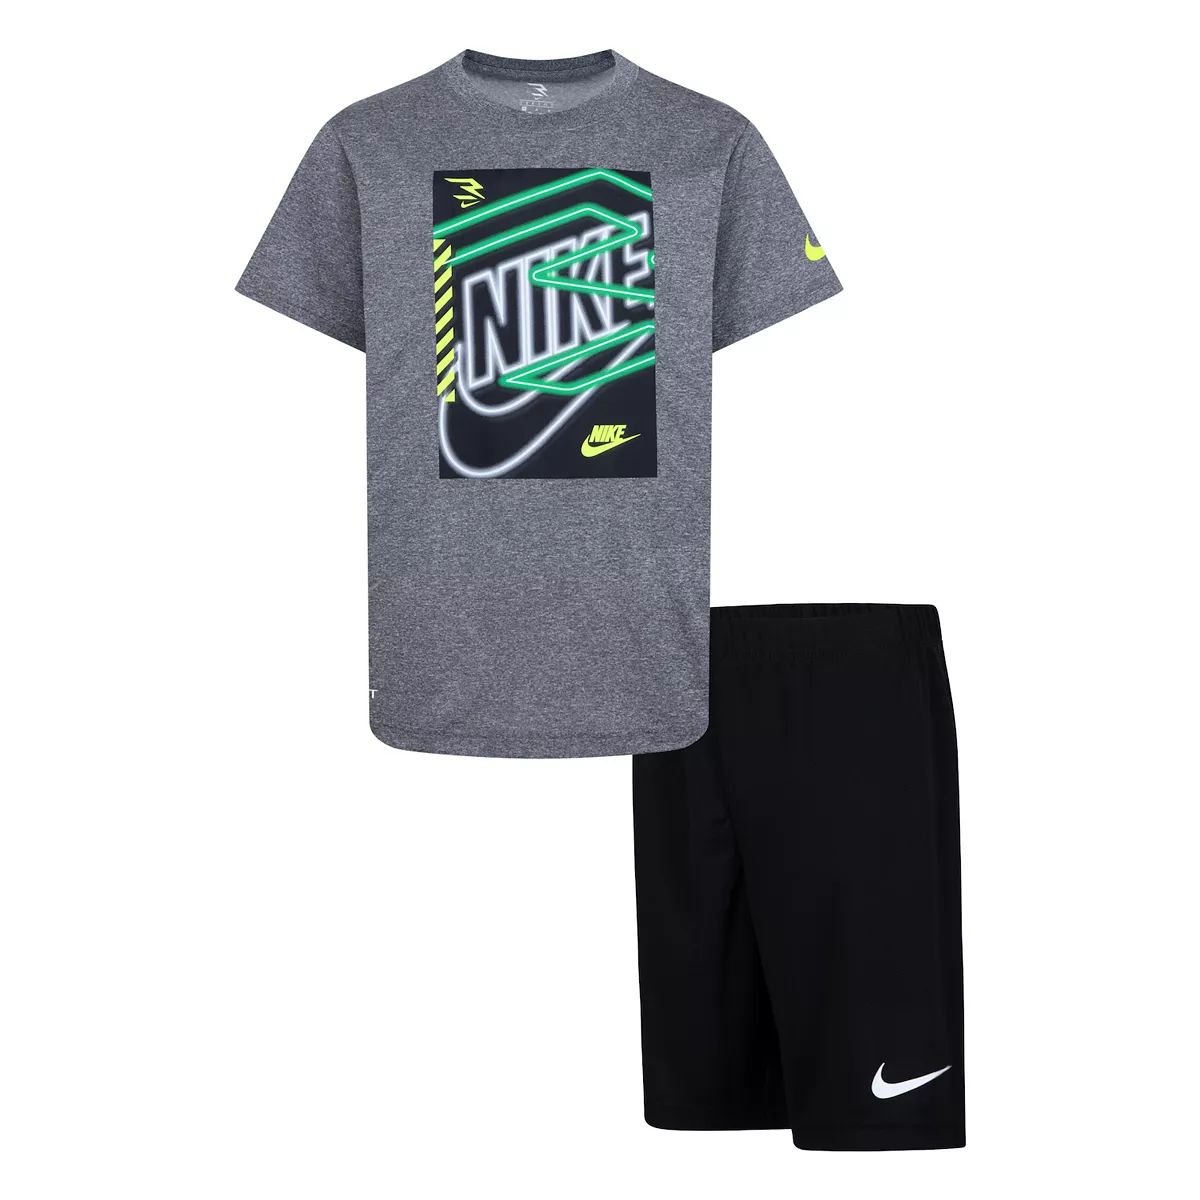 Boys 8-20 Nike 3BRAND by Russell Wilson Futura Logo Dri-FIT T-Shirt and Athletic Shorts 2-piece S... | Kohl's